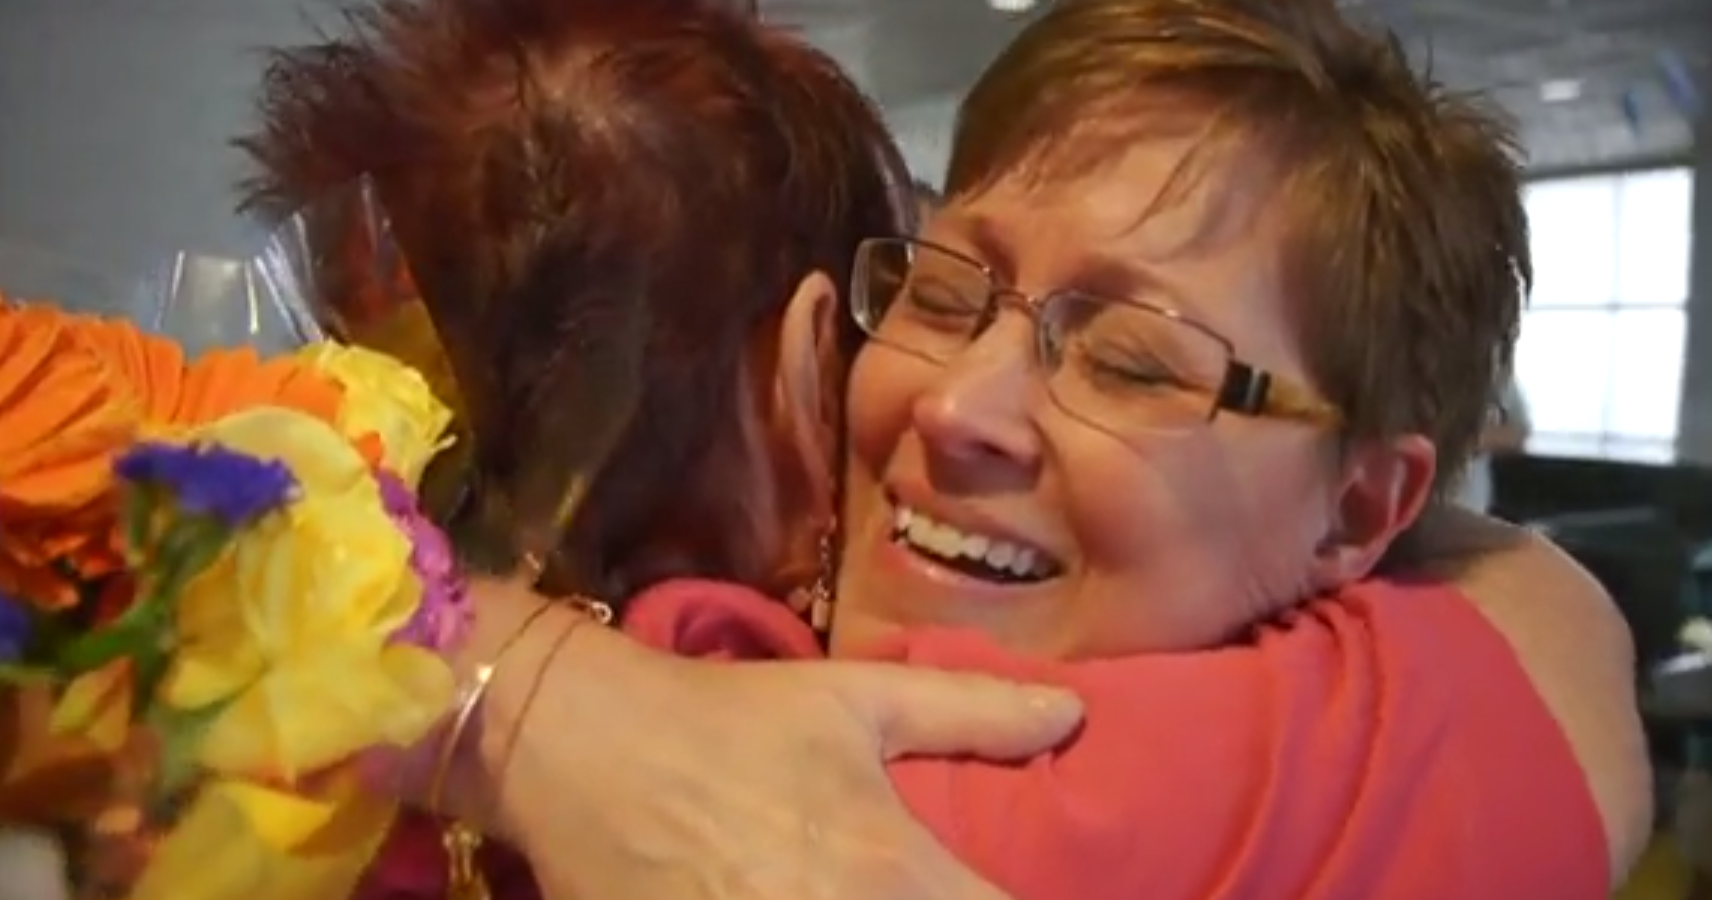 Mother and Daughter Reunited after 50 Years Apart